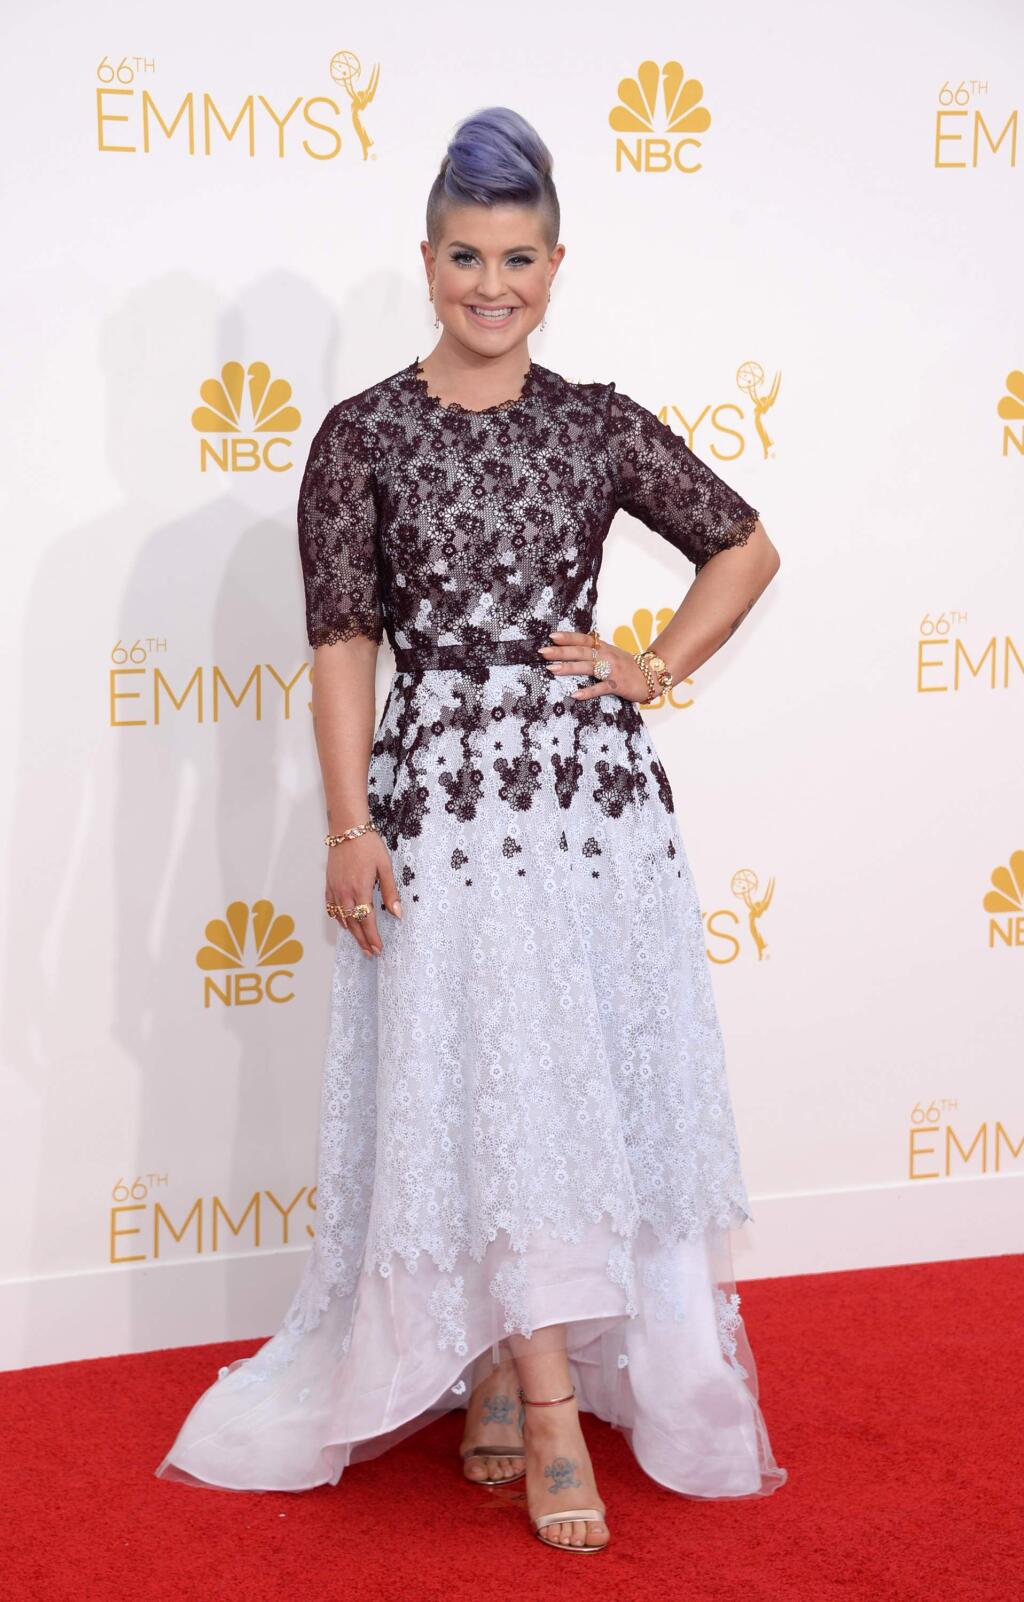 Kelly Osbourne arrives at the 66th Primetime Emmy Awards at the Nokia Theatre L.A. Live on Monday, Aug. 25, 2014, in Los Angeles. (Photo by Evan Agostini/Invision for the Television Academy/AP Images)